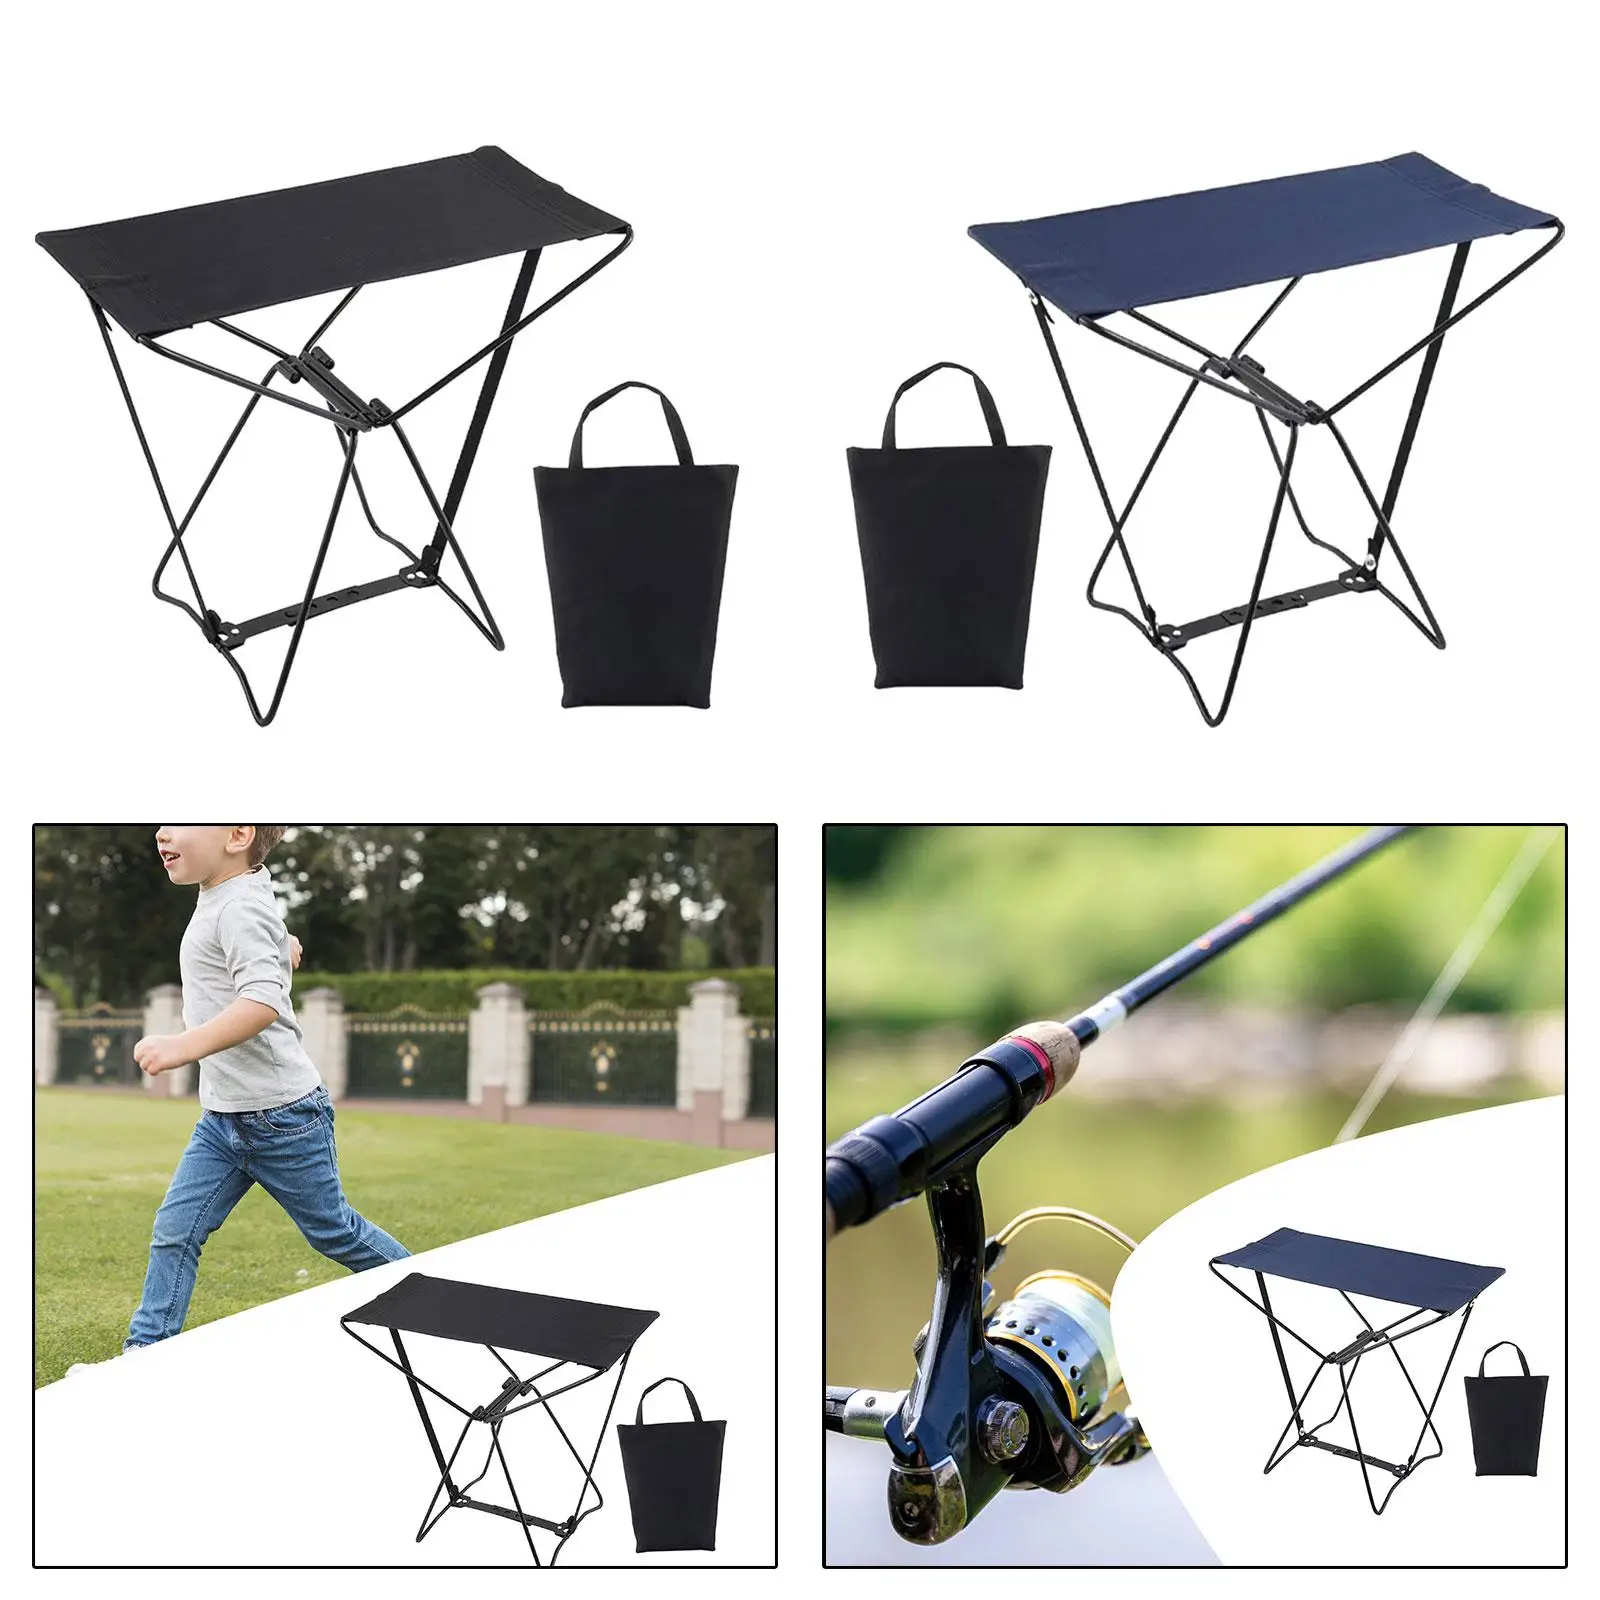 Folding Stool Camping Stool Portable Collapsible Stool for BBQ Yard Patio Picnic